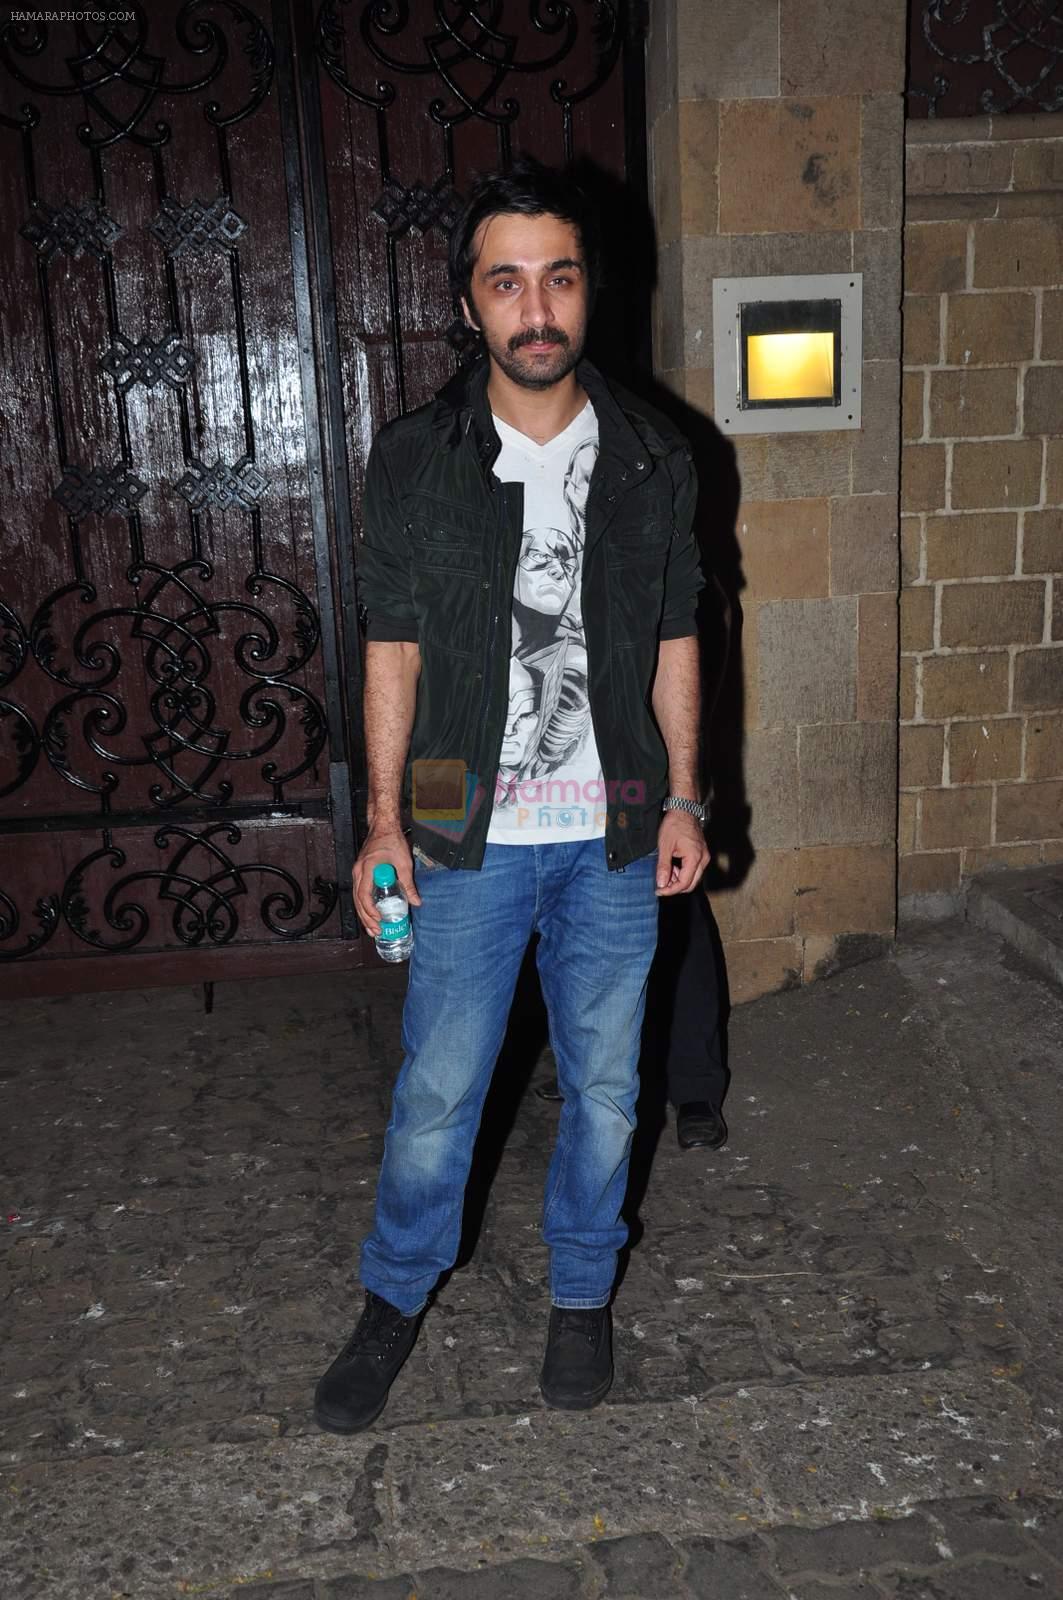 Sidhanth Kapoor at Anil kapoor's bday bash on 23rd Dec 2015